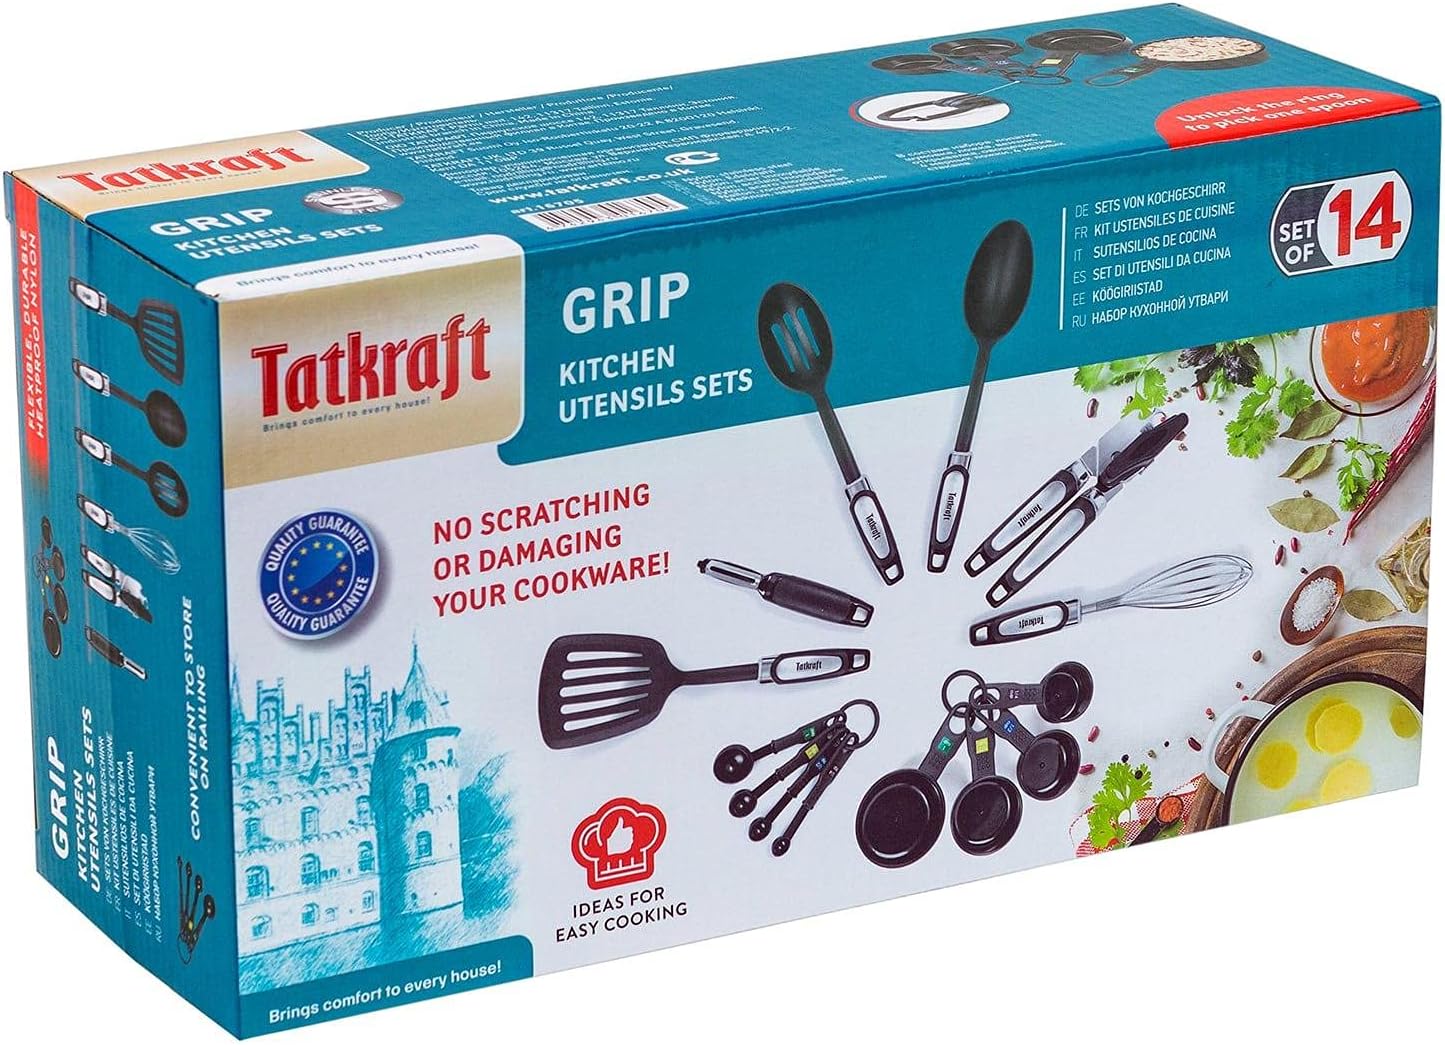 Tatkraft Grip 14-Piece Cooking Utensils, Stainless Steel and Nylon Kitchen Utensil Set Includes Cooking Spoon, Slotted Spoon, Whisk, Slotted Turner, Peeler, Can Opener, Measuring Cups and Spoons Set